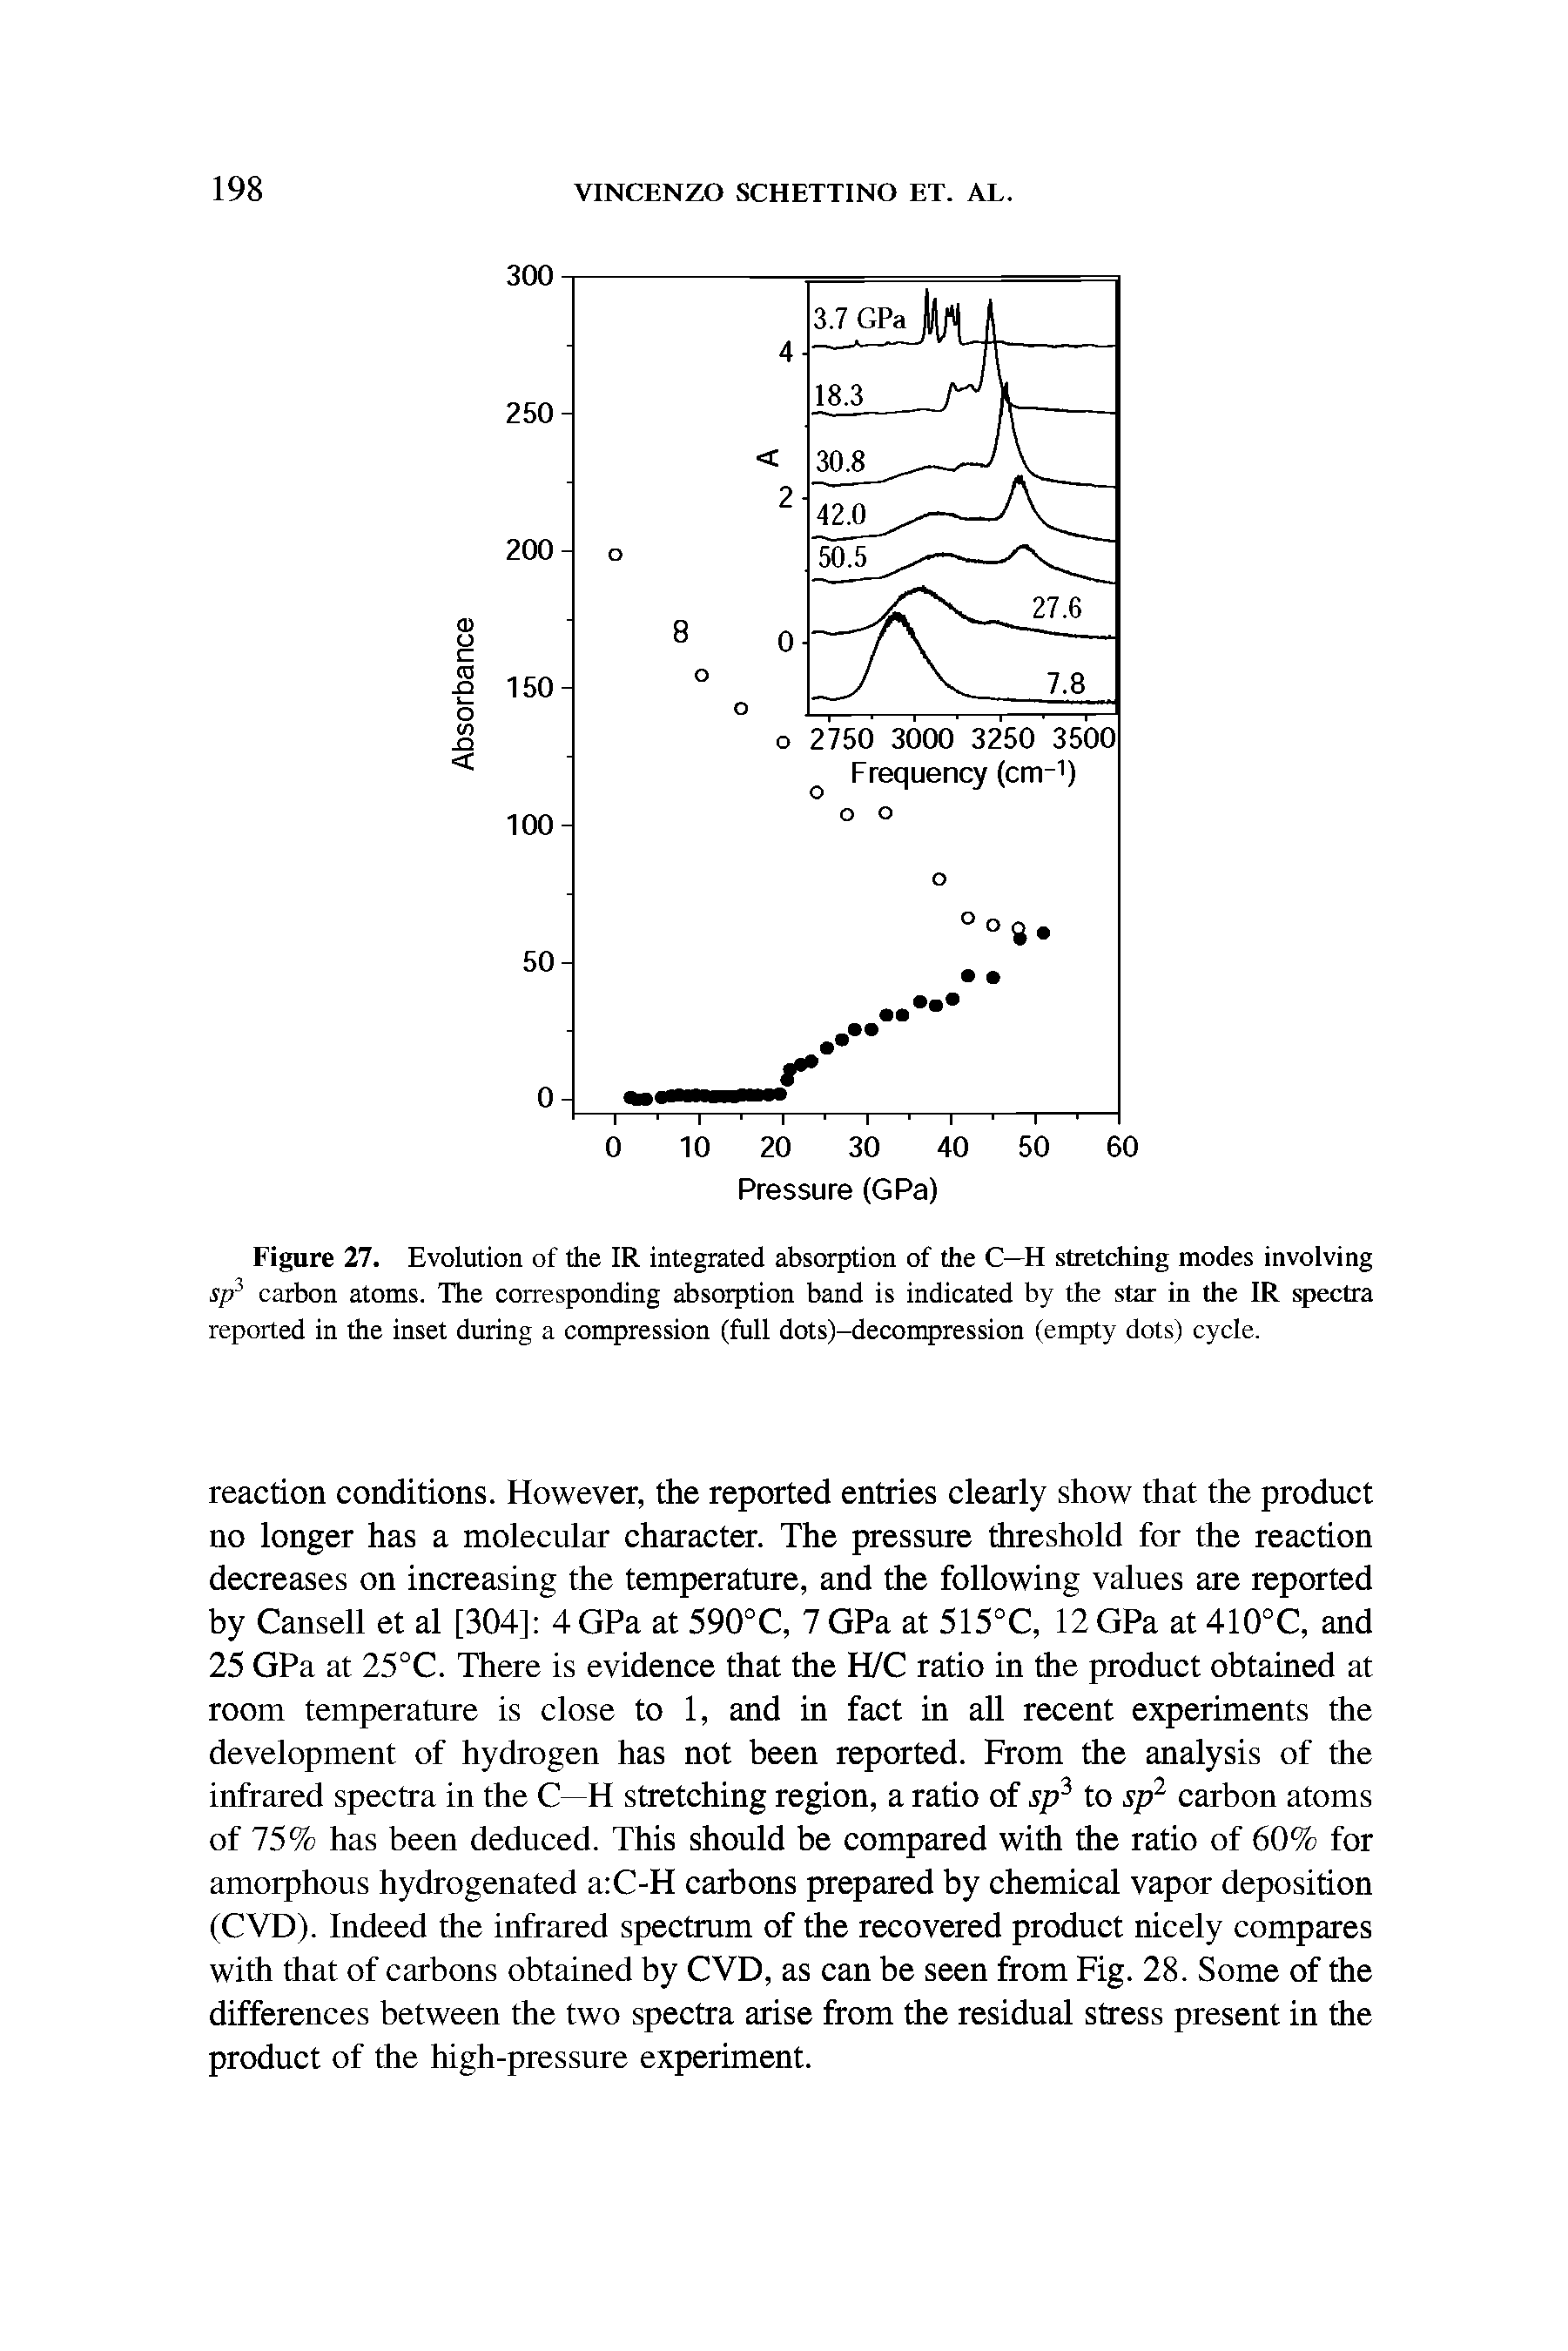 Figure 27. Evolution of the IR integrated absorption of the C—H stretching modes involving sp carbon atoms. The corresponding absorption band is indicated by the star in the IR spectra reported in the inset during a compression (full dots)-decompression (empty dots) cycle.